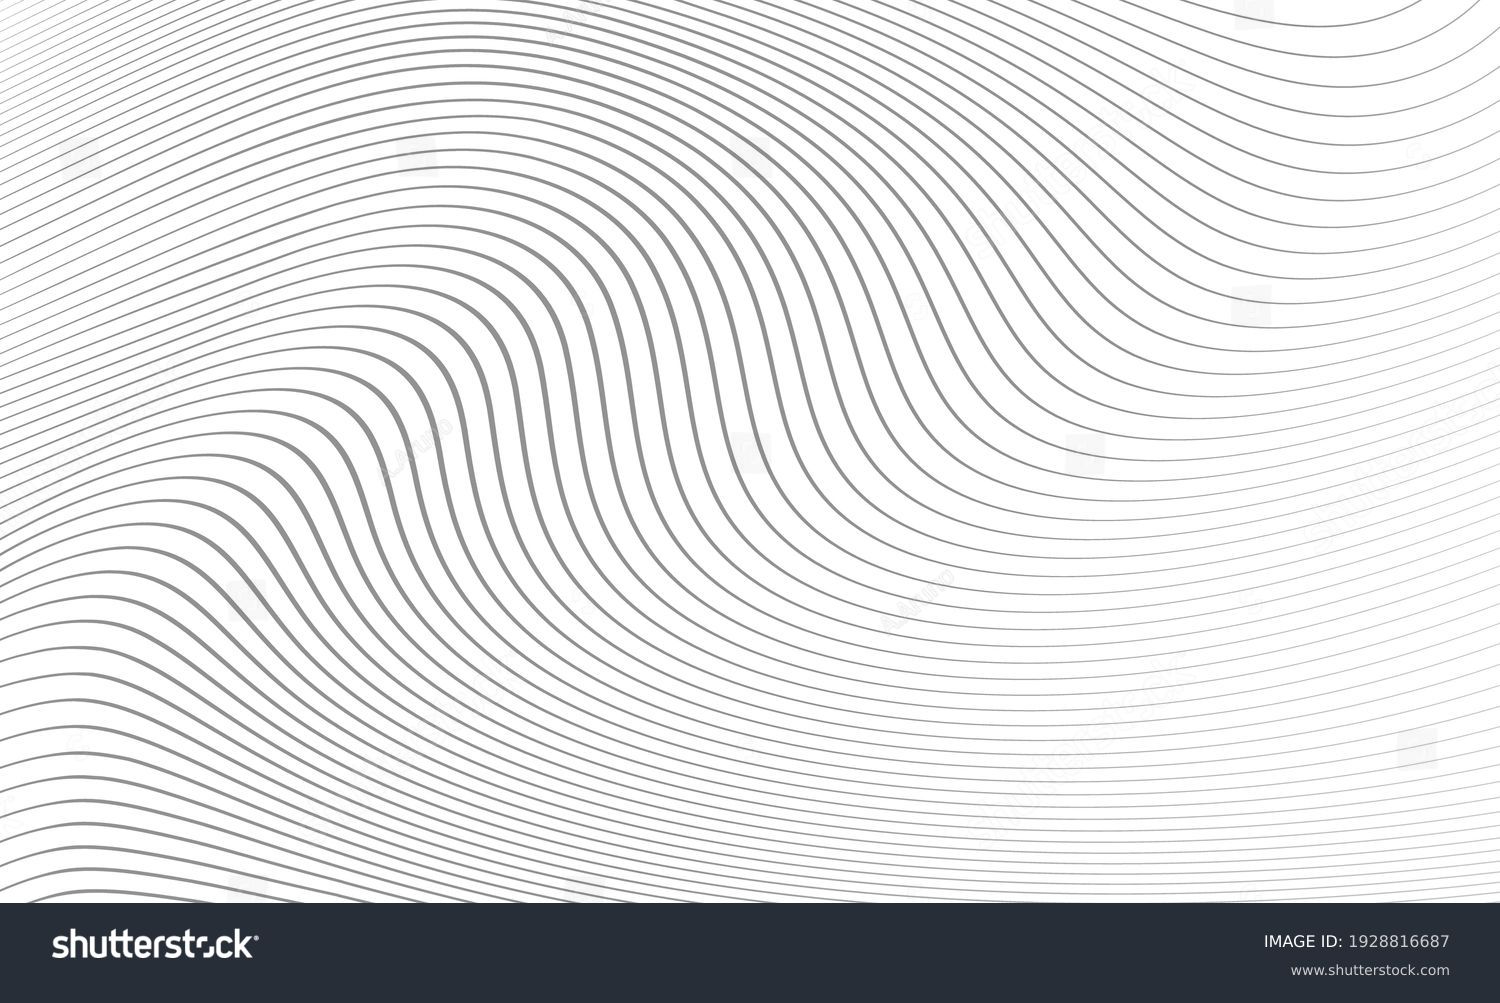 Vector Illustration of the gray pattern of lines abstract background. EPS10. #1928816687